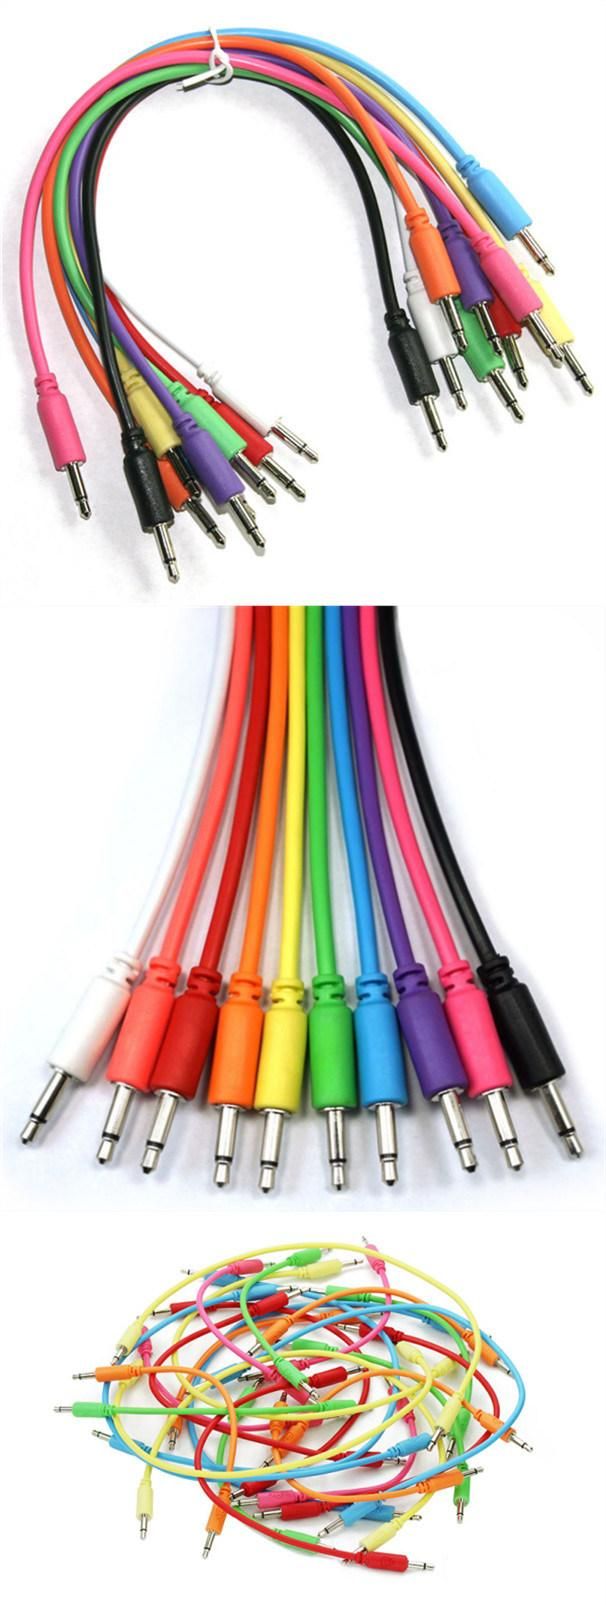 3.5mm Mono Male Cables for  3.5mm Mono Sockets